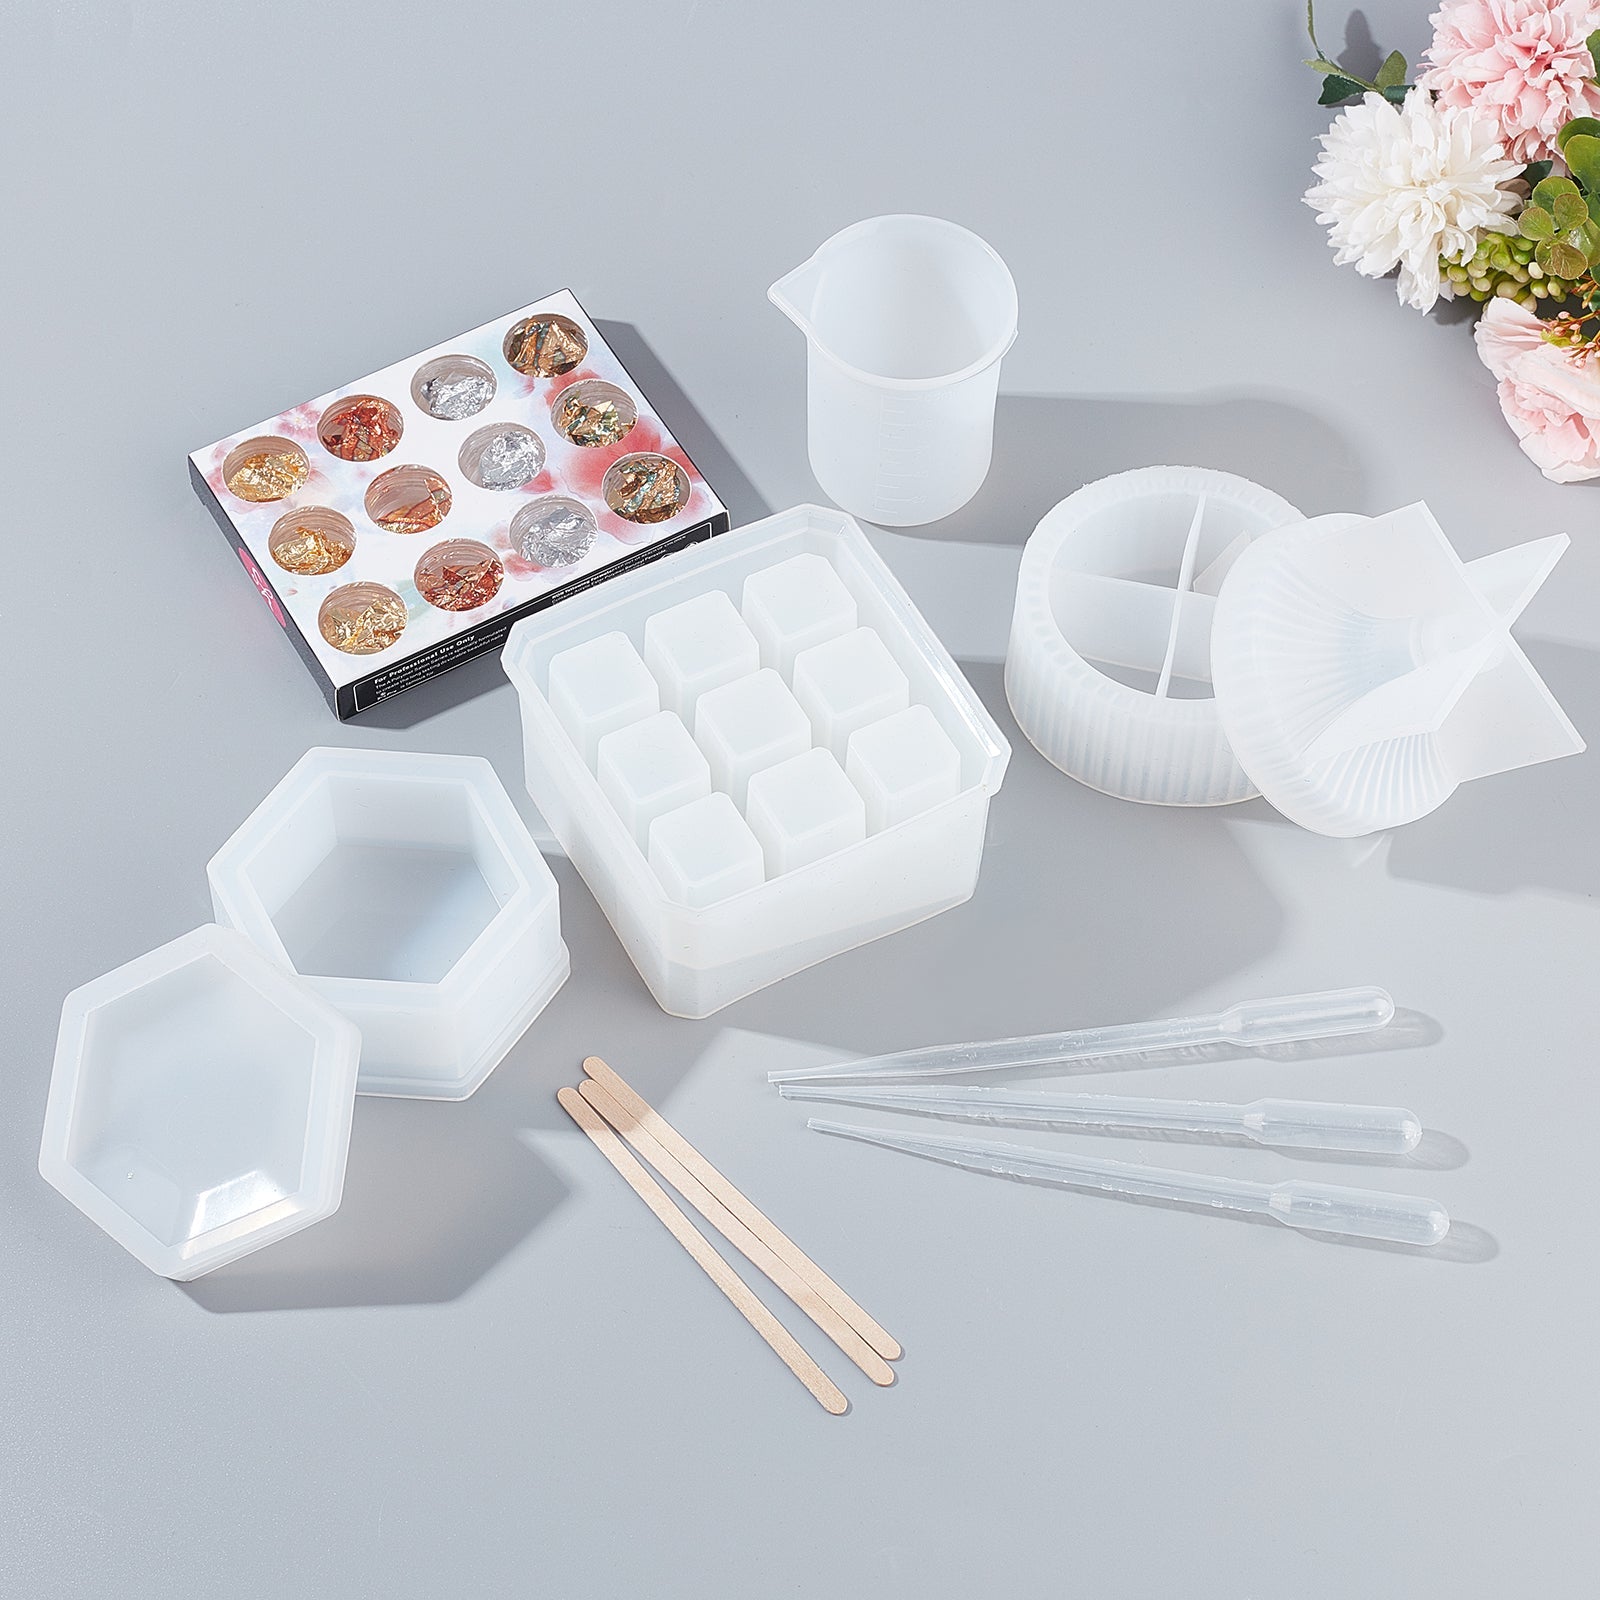 CRASPIRE DIY Beauty Makeup Storage Box Epoxy Resin Crafts Kits, with  Silicone Storage Box Molds, UV Gel Nail Art Tinfoil, Plastic Measuring Cups  & Transfer Pipettes, PVC Gloves, Wooden Sticks, White, 82x60mm